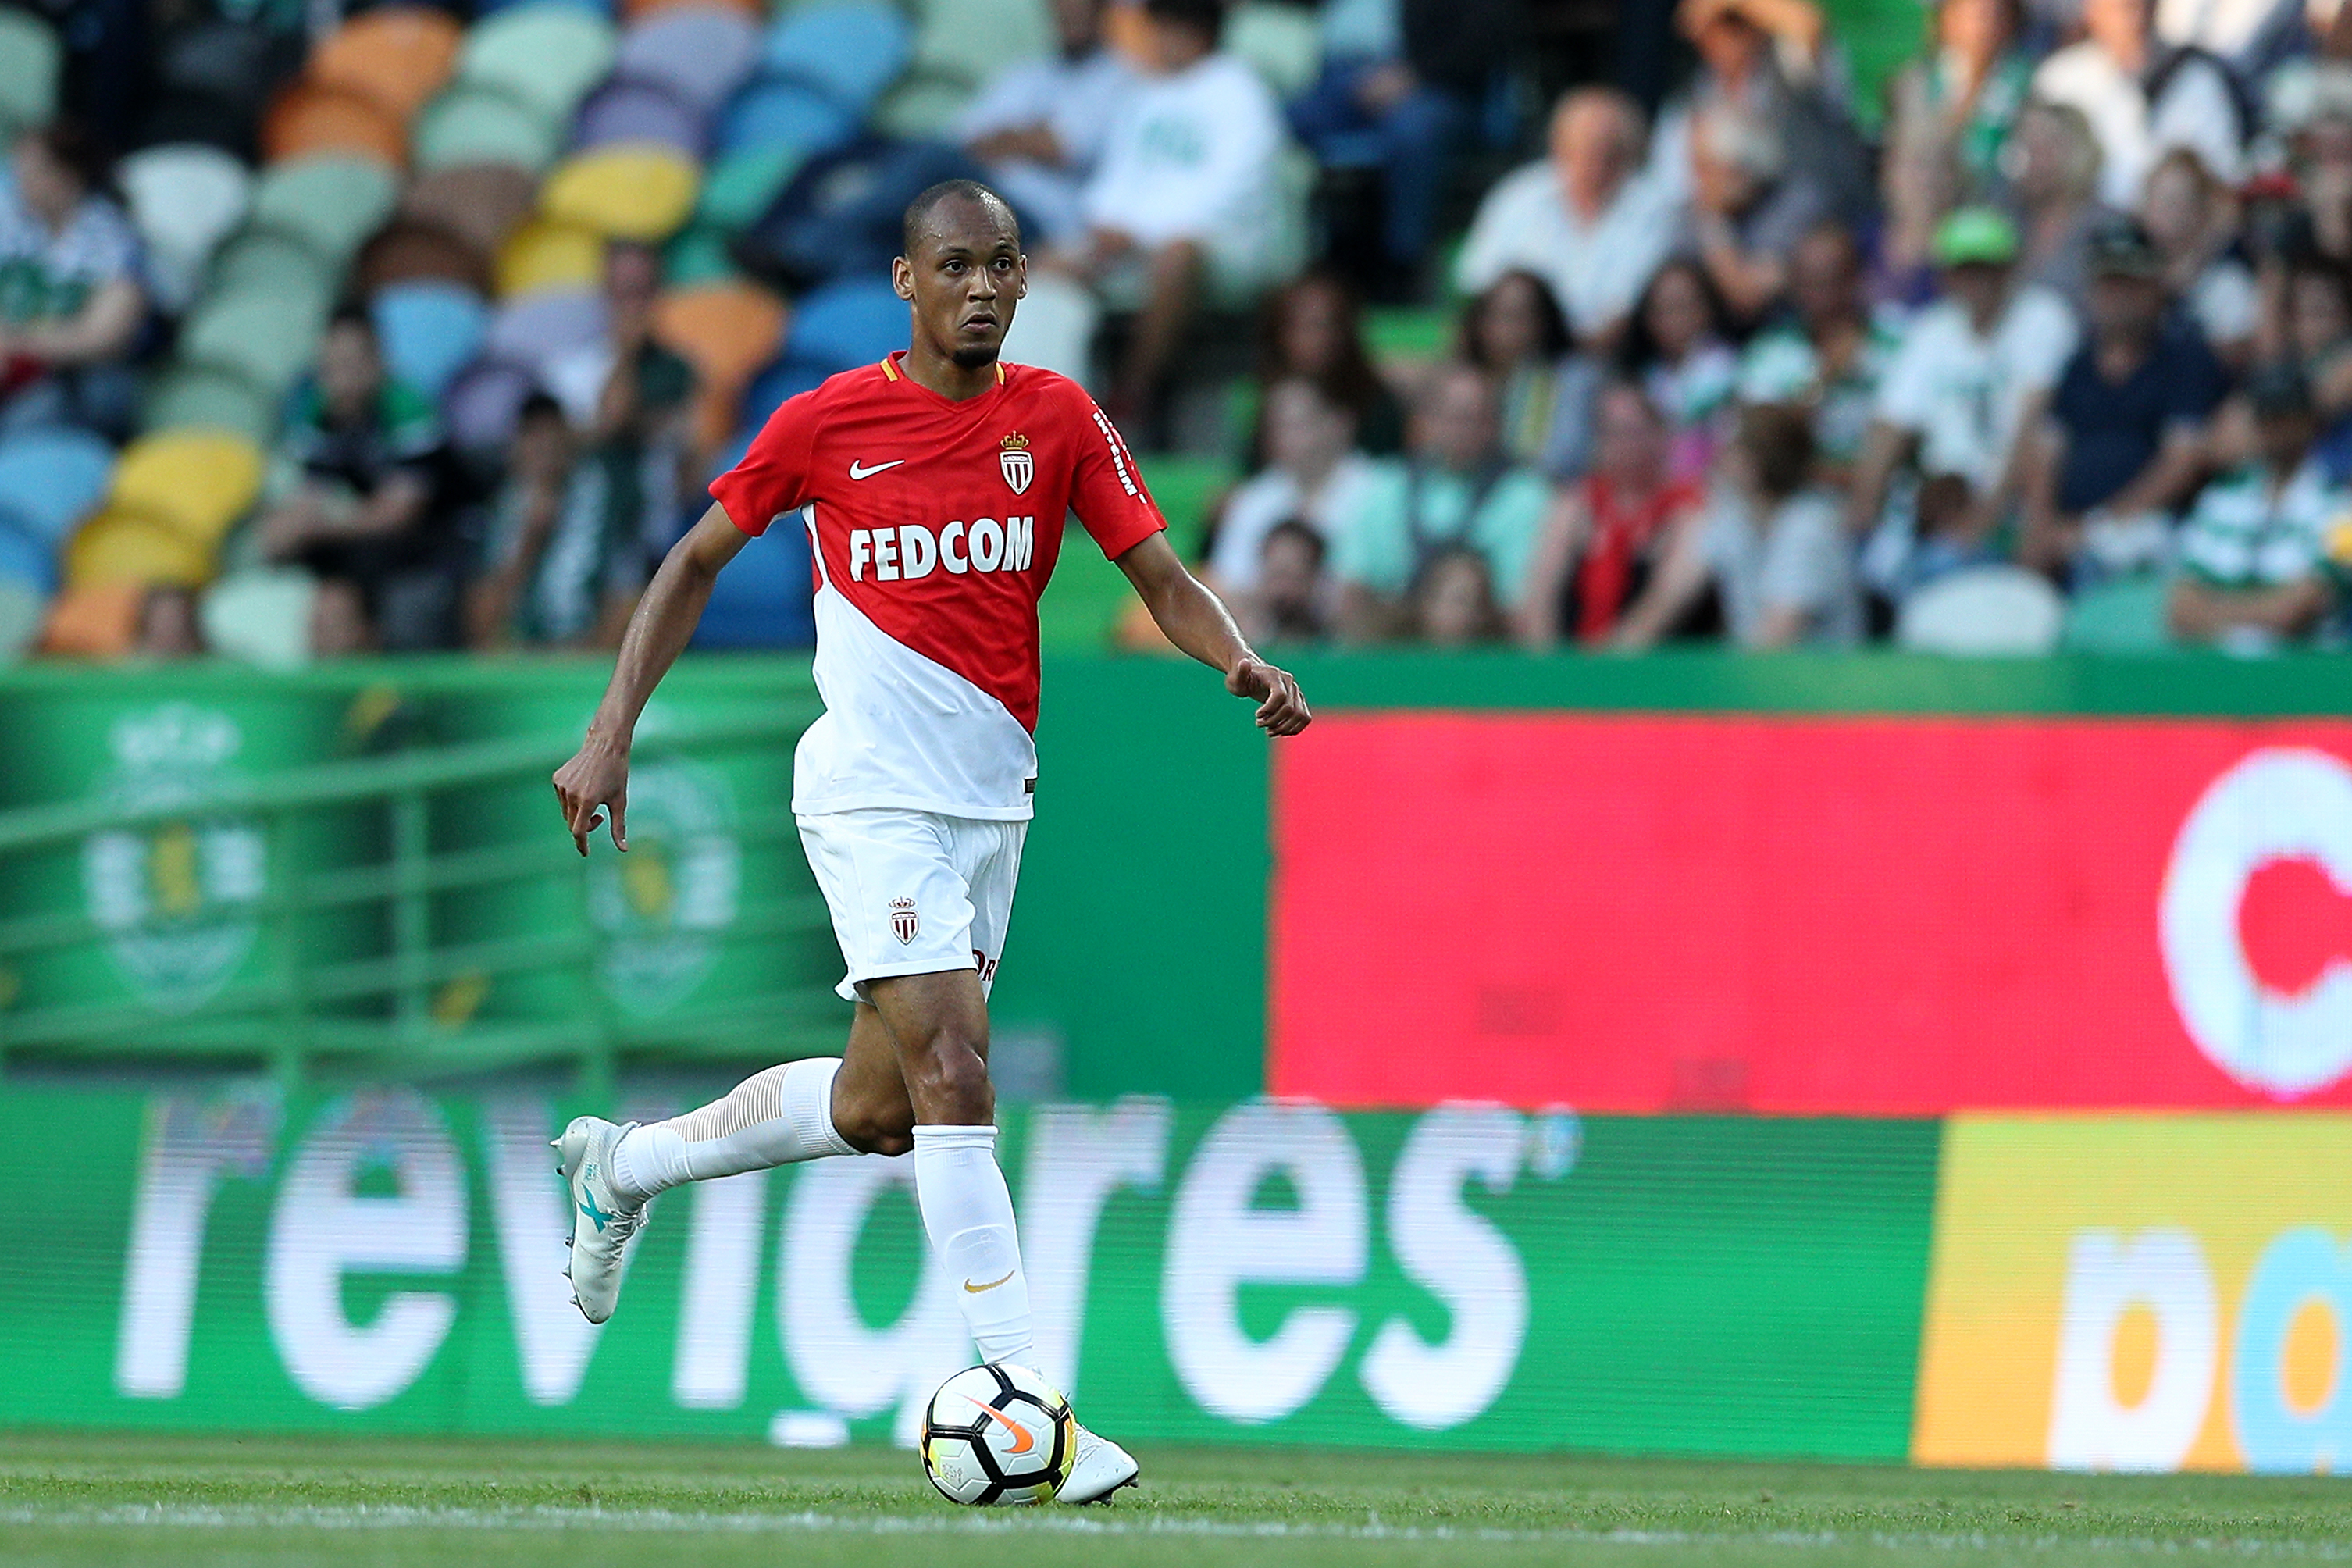 LISBON, PORTUGAL - JULY 22: Monaco midfielder Fabinho from Brasil during the Friendly match between Sporting CP and AS Monaco at Estadio Jose Alvalade on July 22, 2017 in Lisbon, Portugal.  (Photo by Carlos Rodrigues/Getty Images)